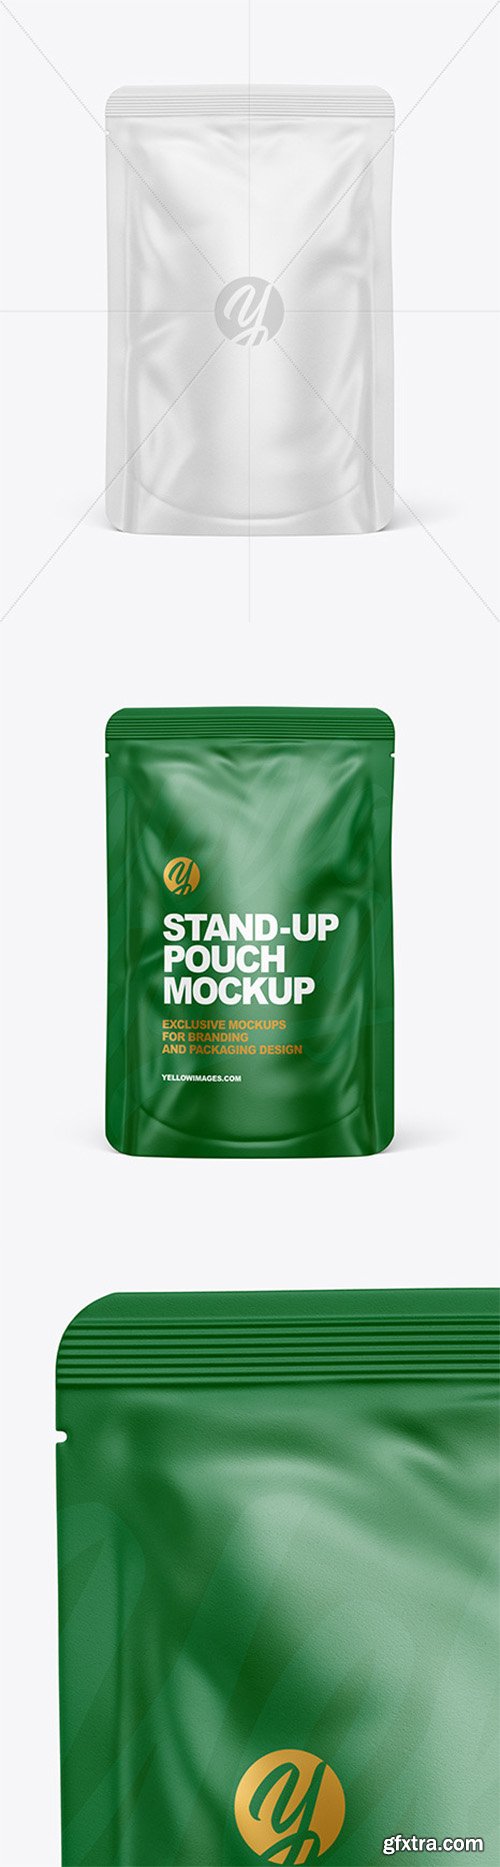 Paper Stand-up Pouch Mockup 61334